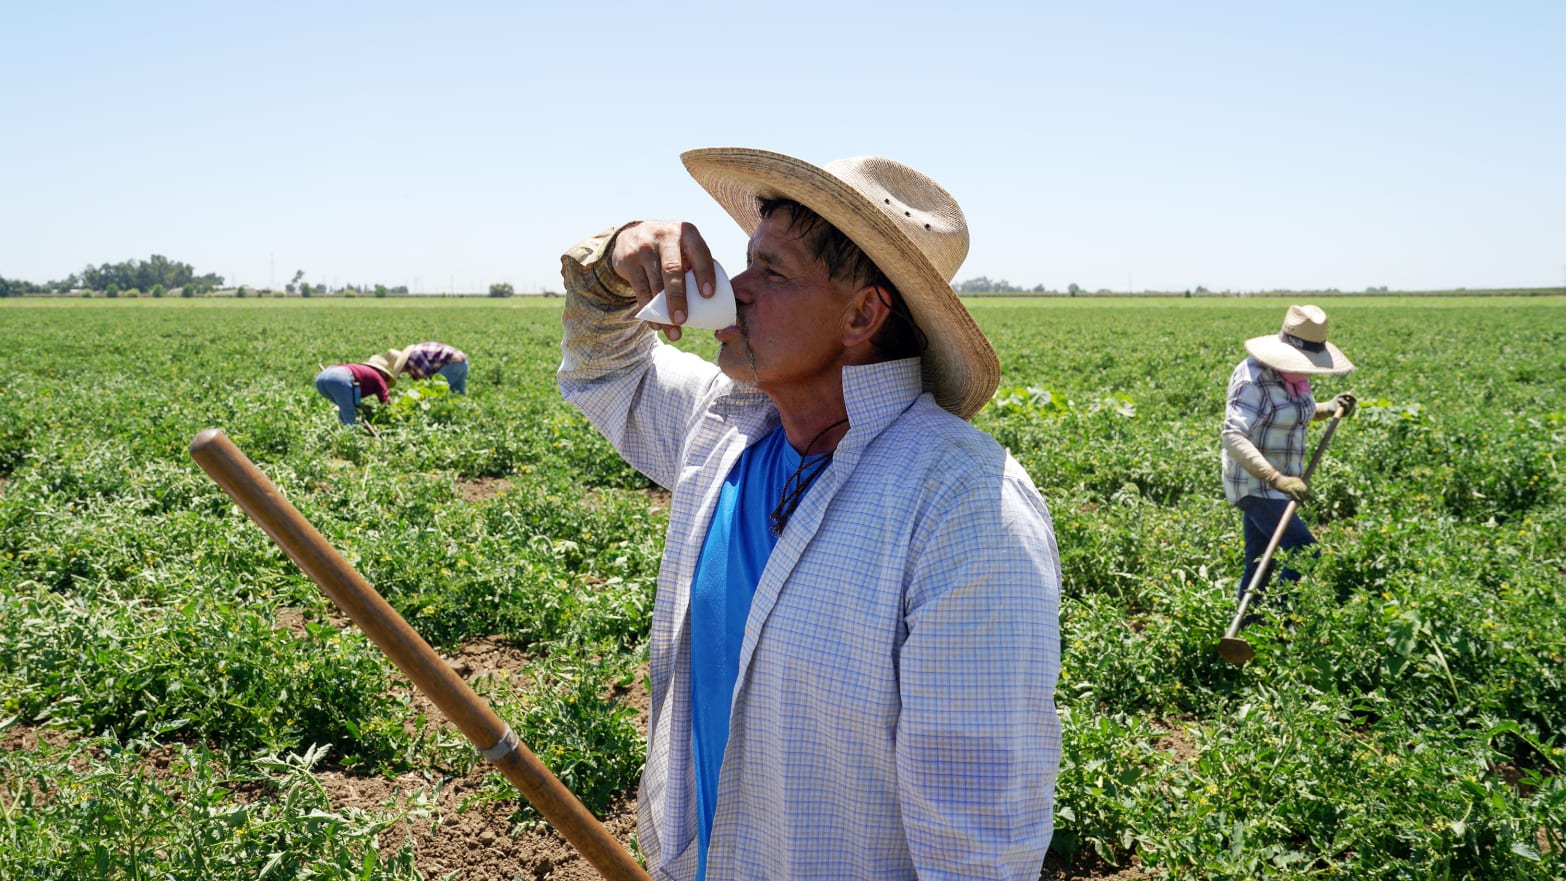 Agricultural worker Ernesto Hernandez takes a water break while enduring high temperatures in a tomato field.